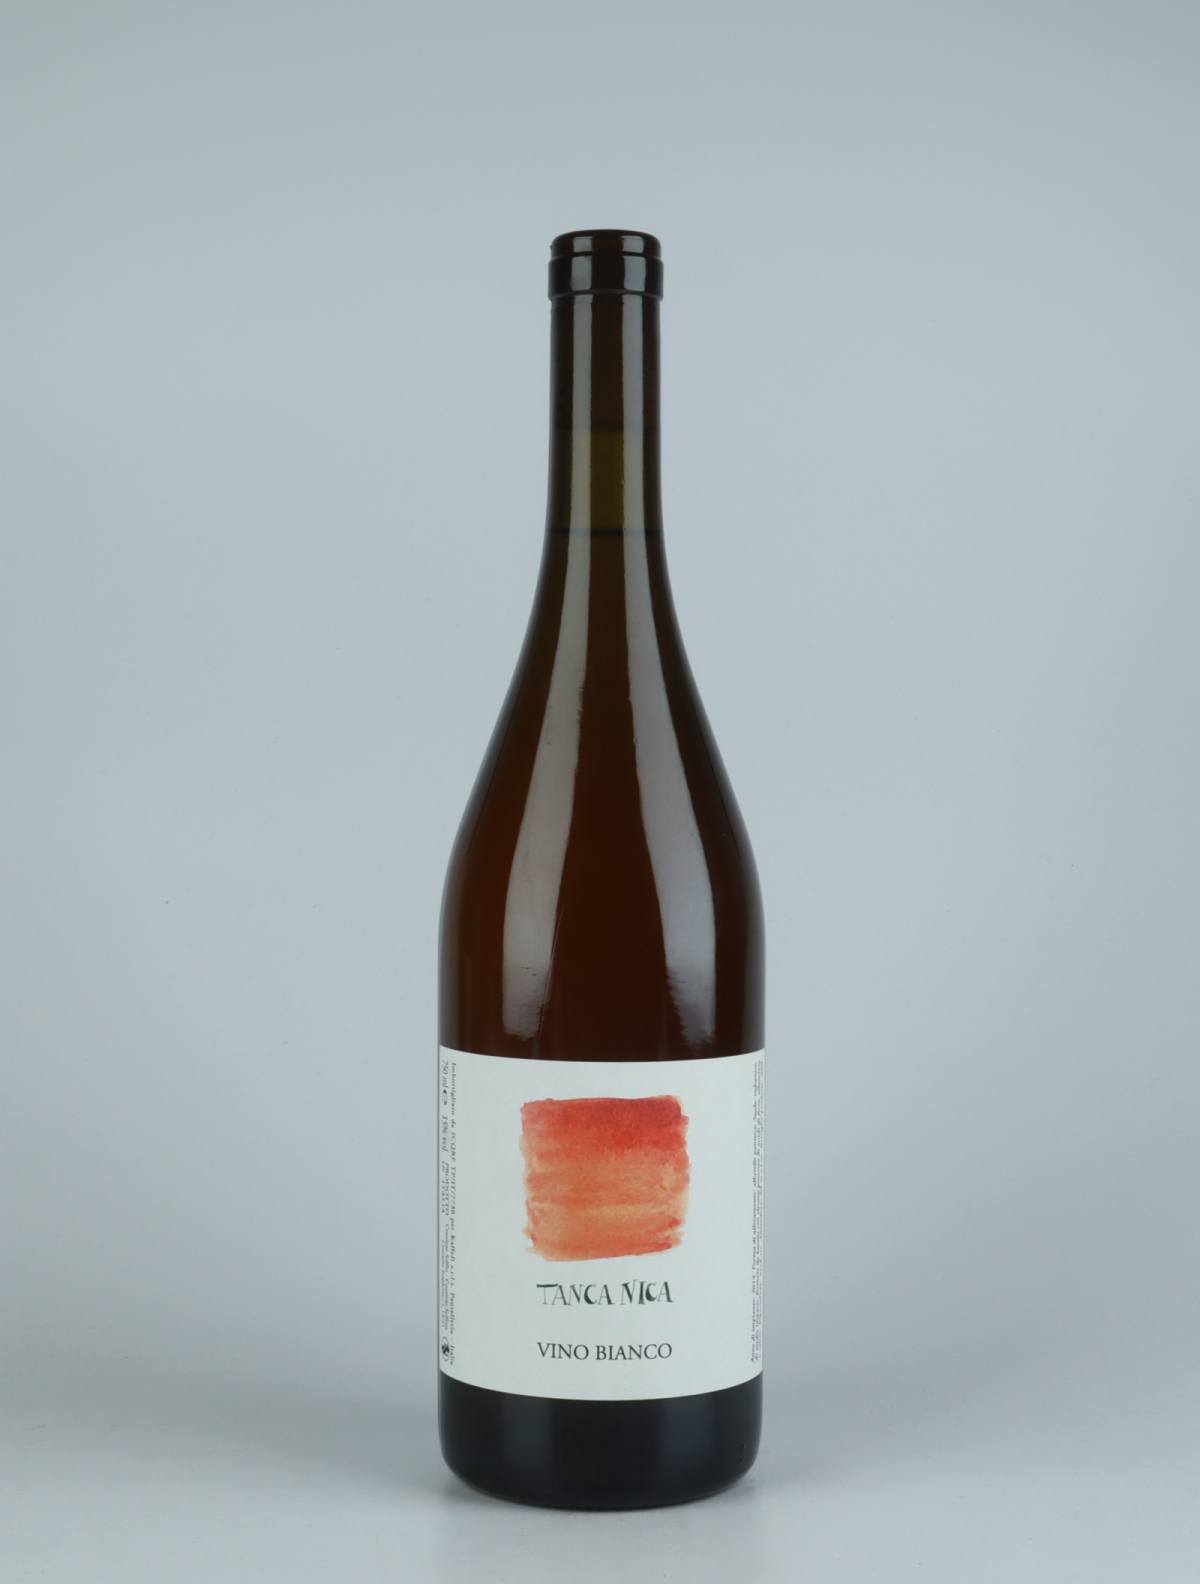 A bottle 2020 Tanca Nica 3 (Orange label) White wine from Tanca Nica, Sicily in Italy